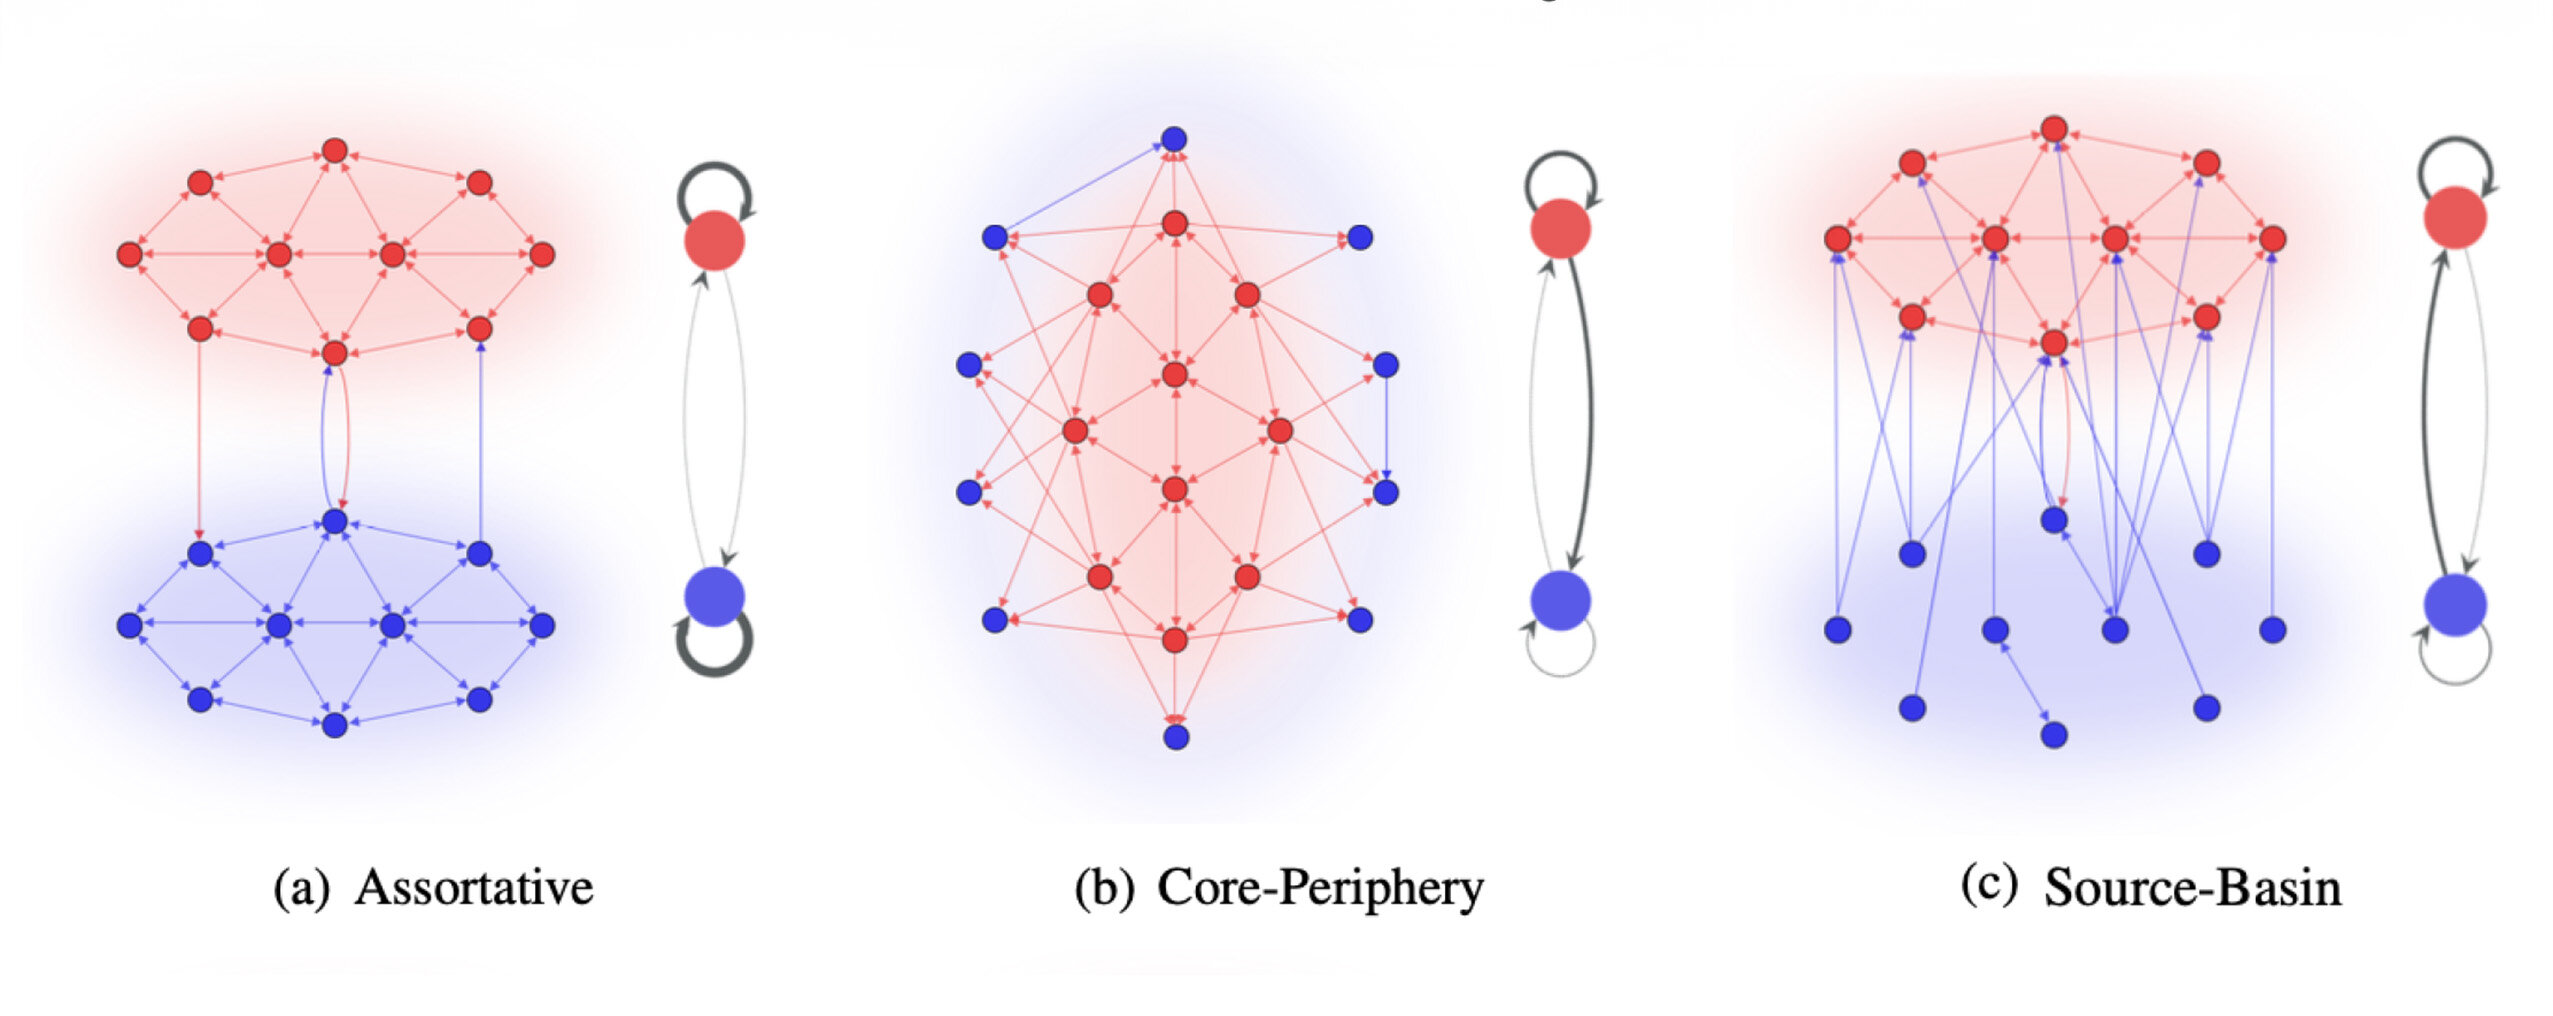 Researchers discover hidden structure in networks like Twitter